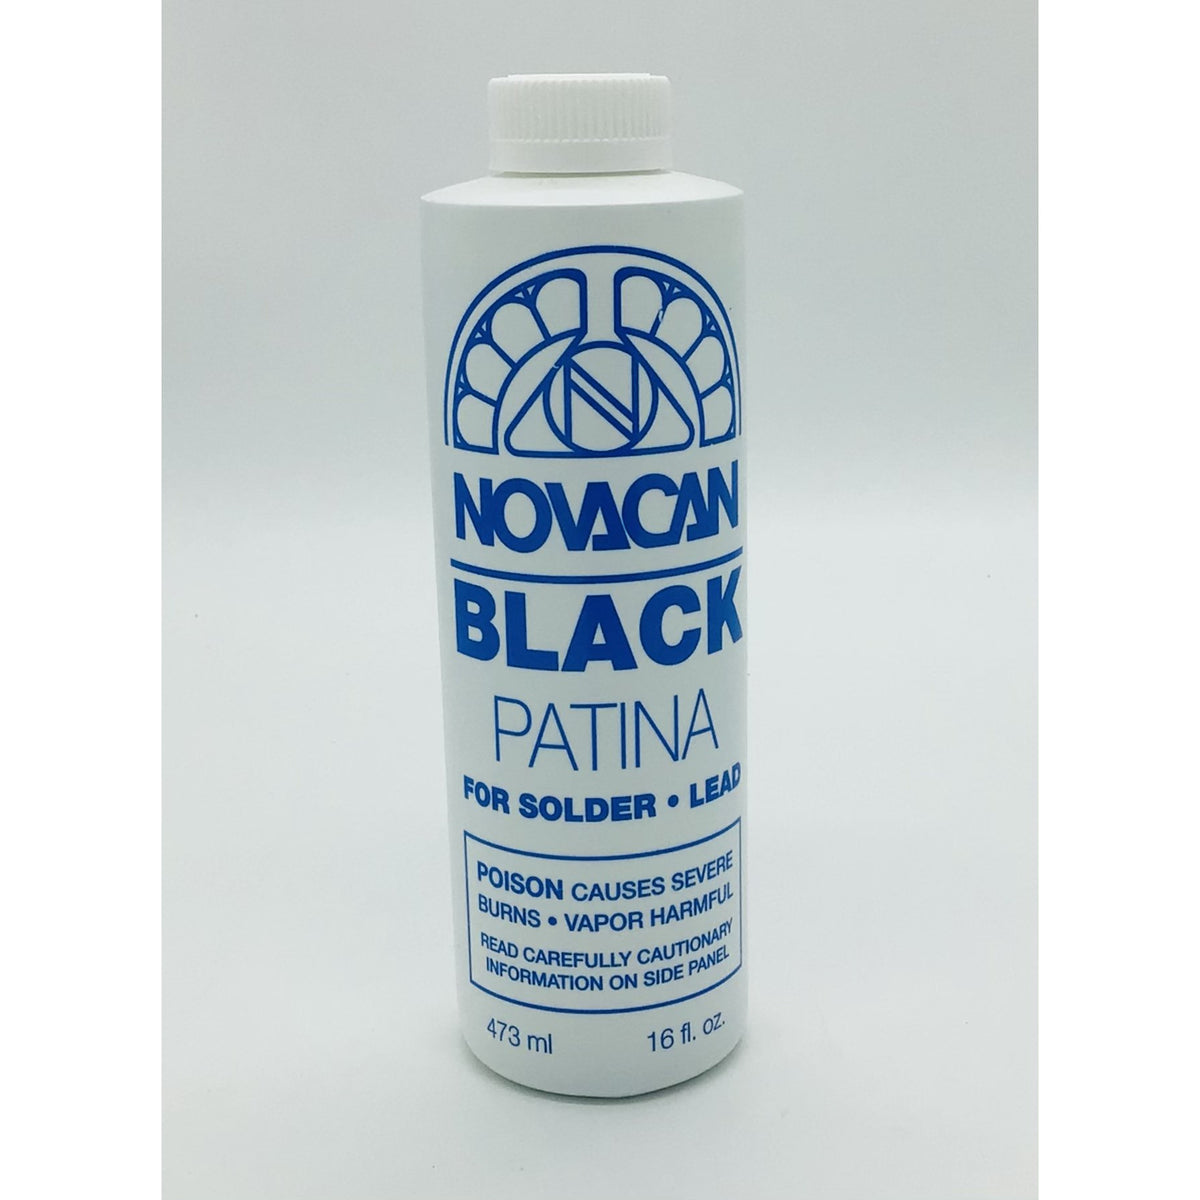 16 oz PATINA FOR STAINED GLASS Novacan BLACK for Solder Lead CHEMICALS –  Rocky Mountain Glass Crafts